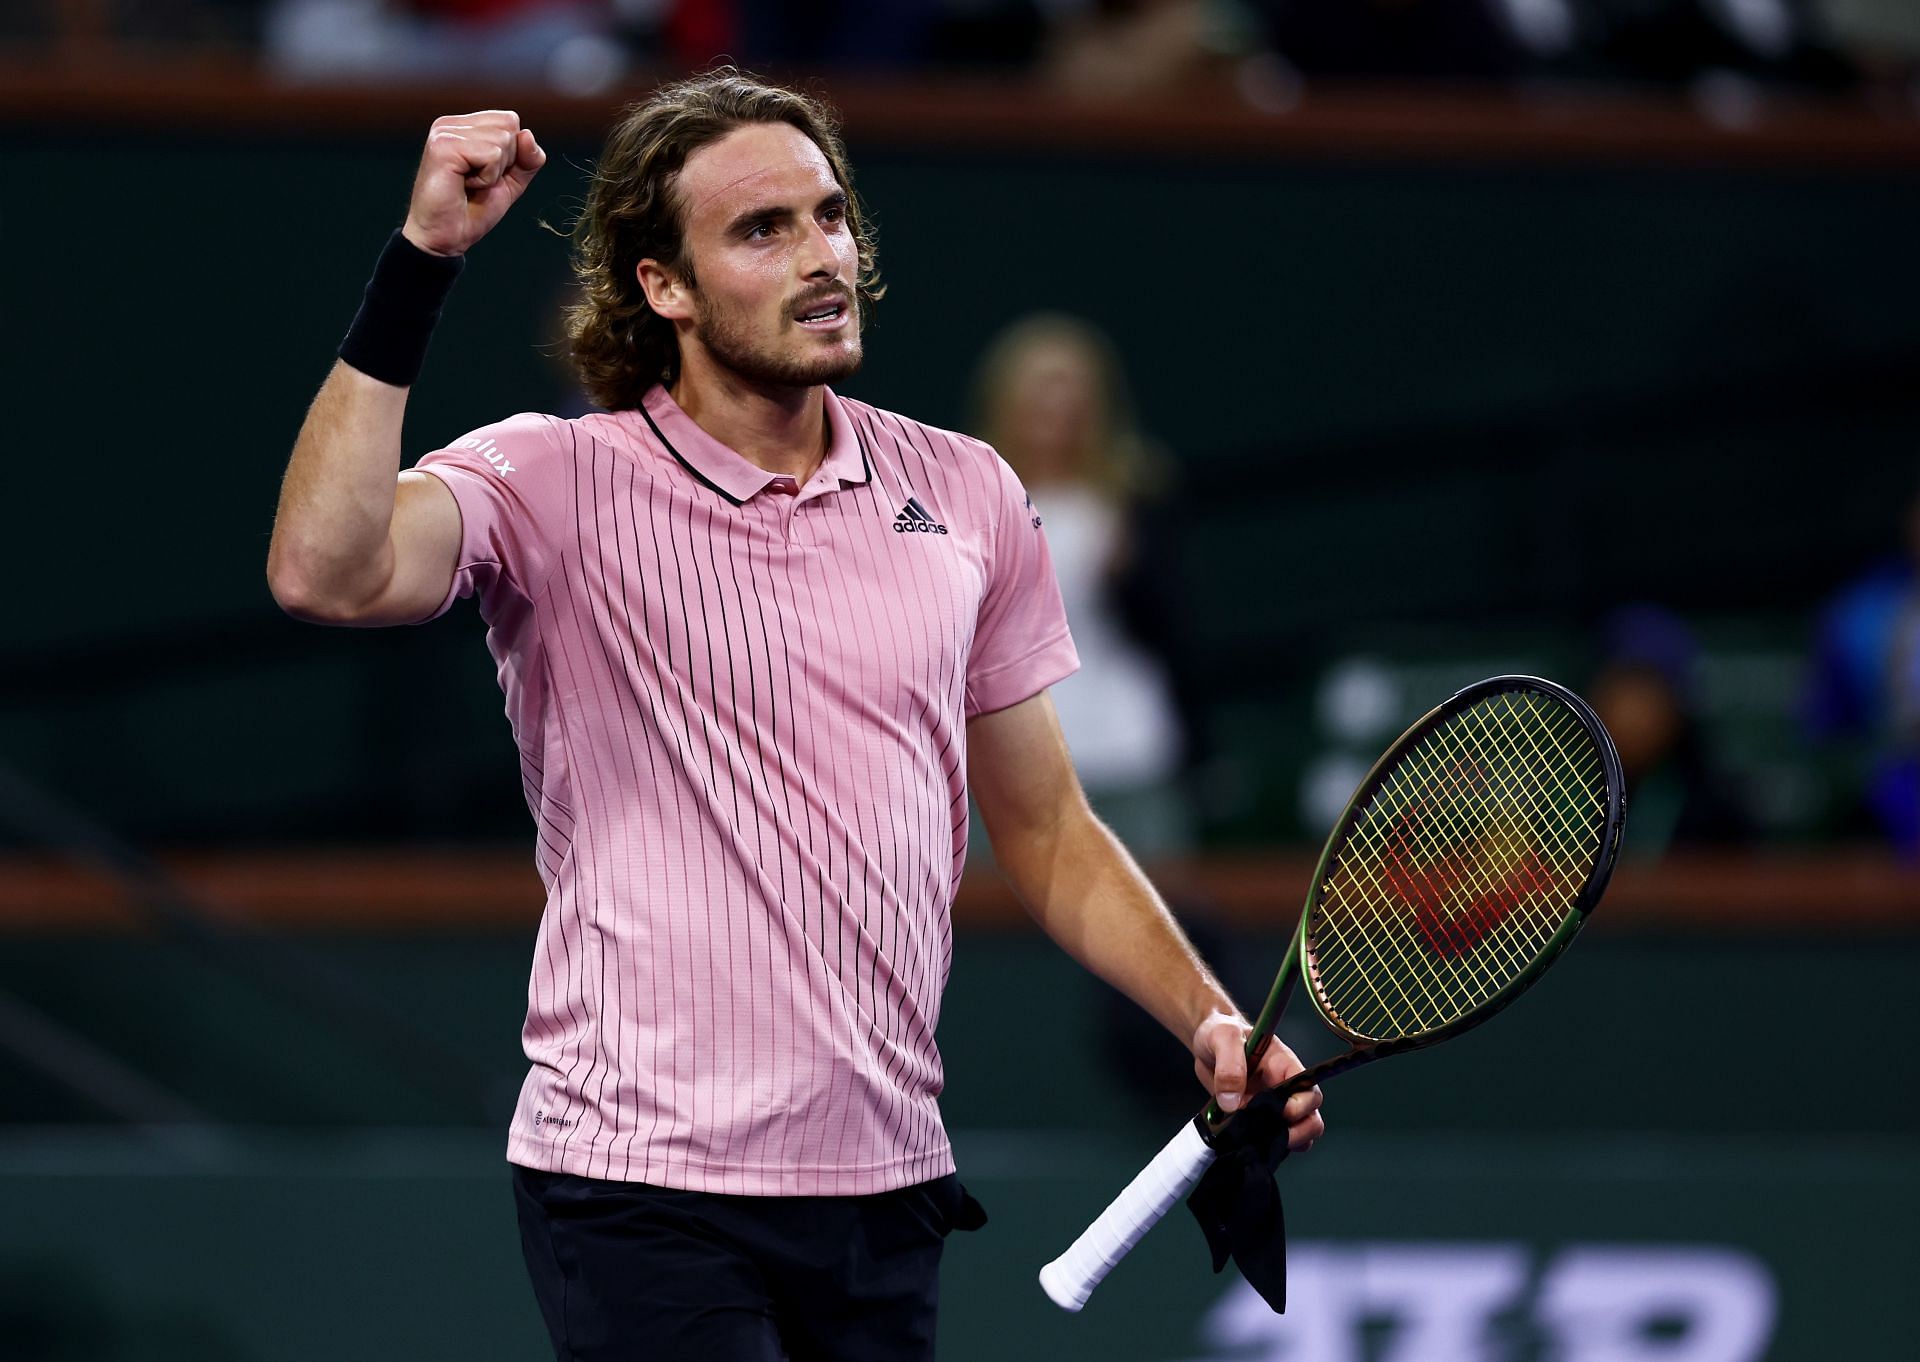 Miami Open 2022 Schedule Today TV schedule, start time, order of play